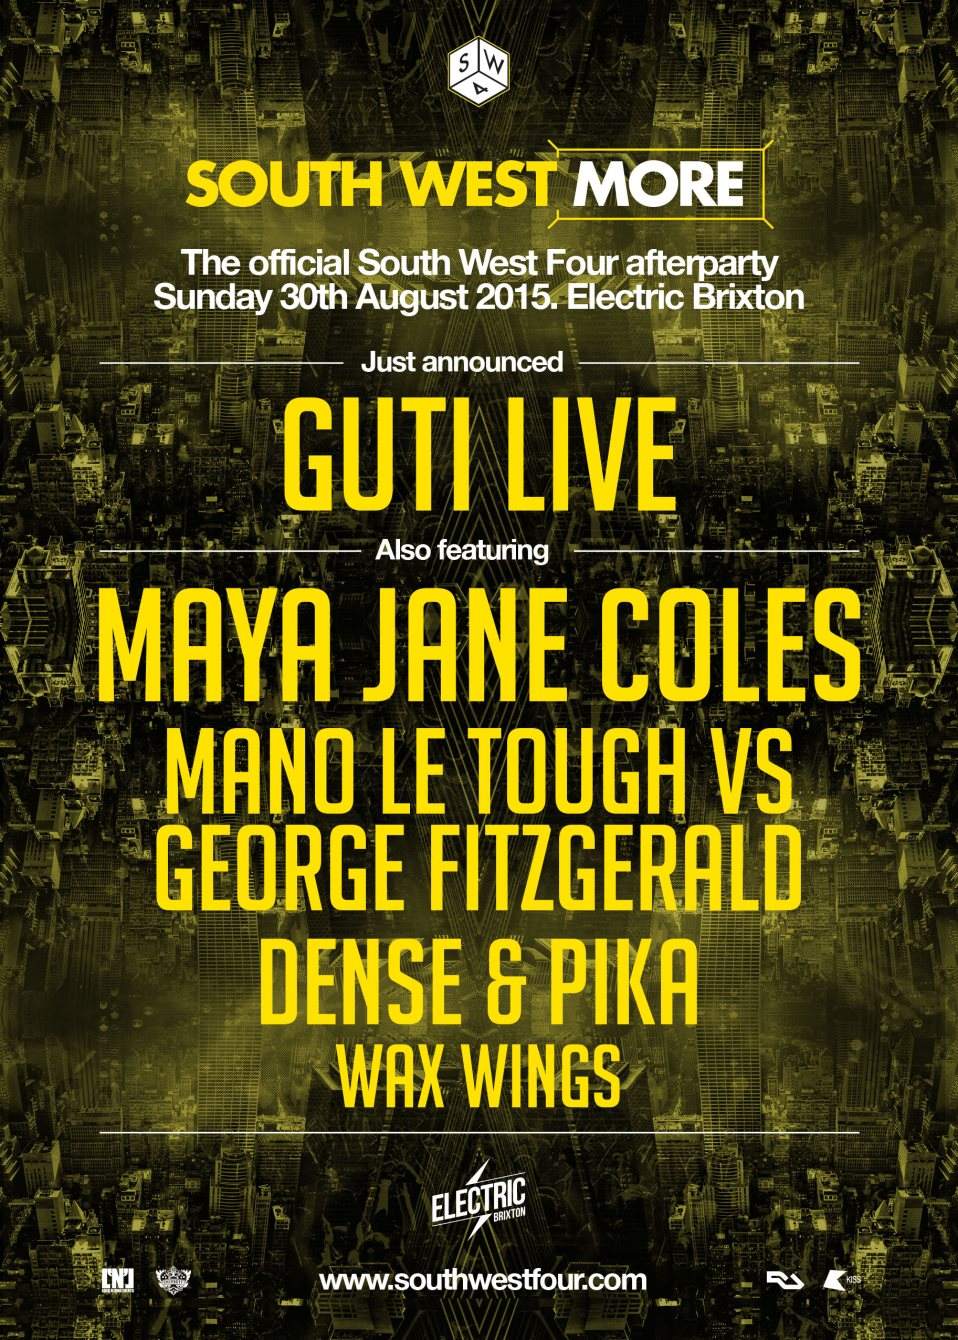 South West More with Maya Jane Coles, Mano Le Tough vs George Fitzgerald - Página frontal